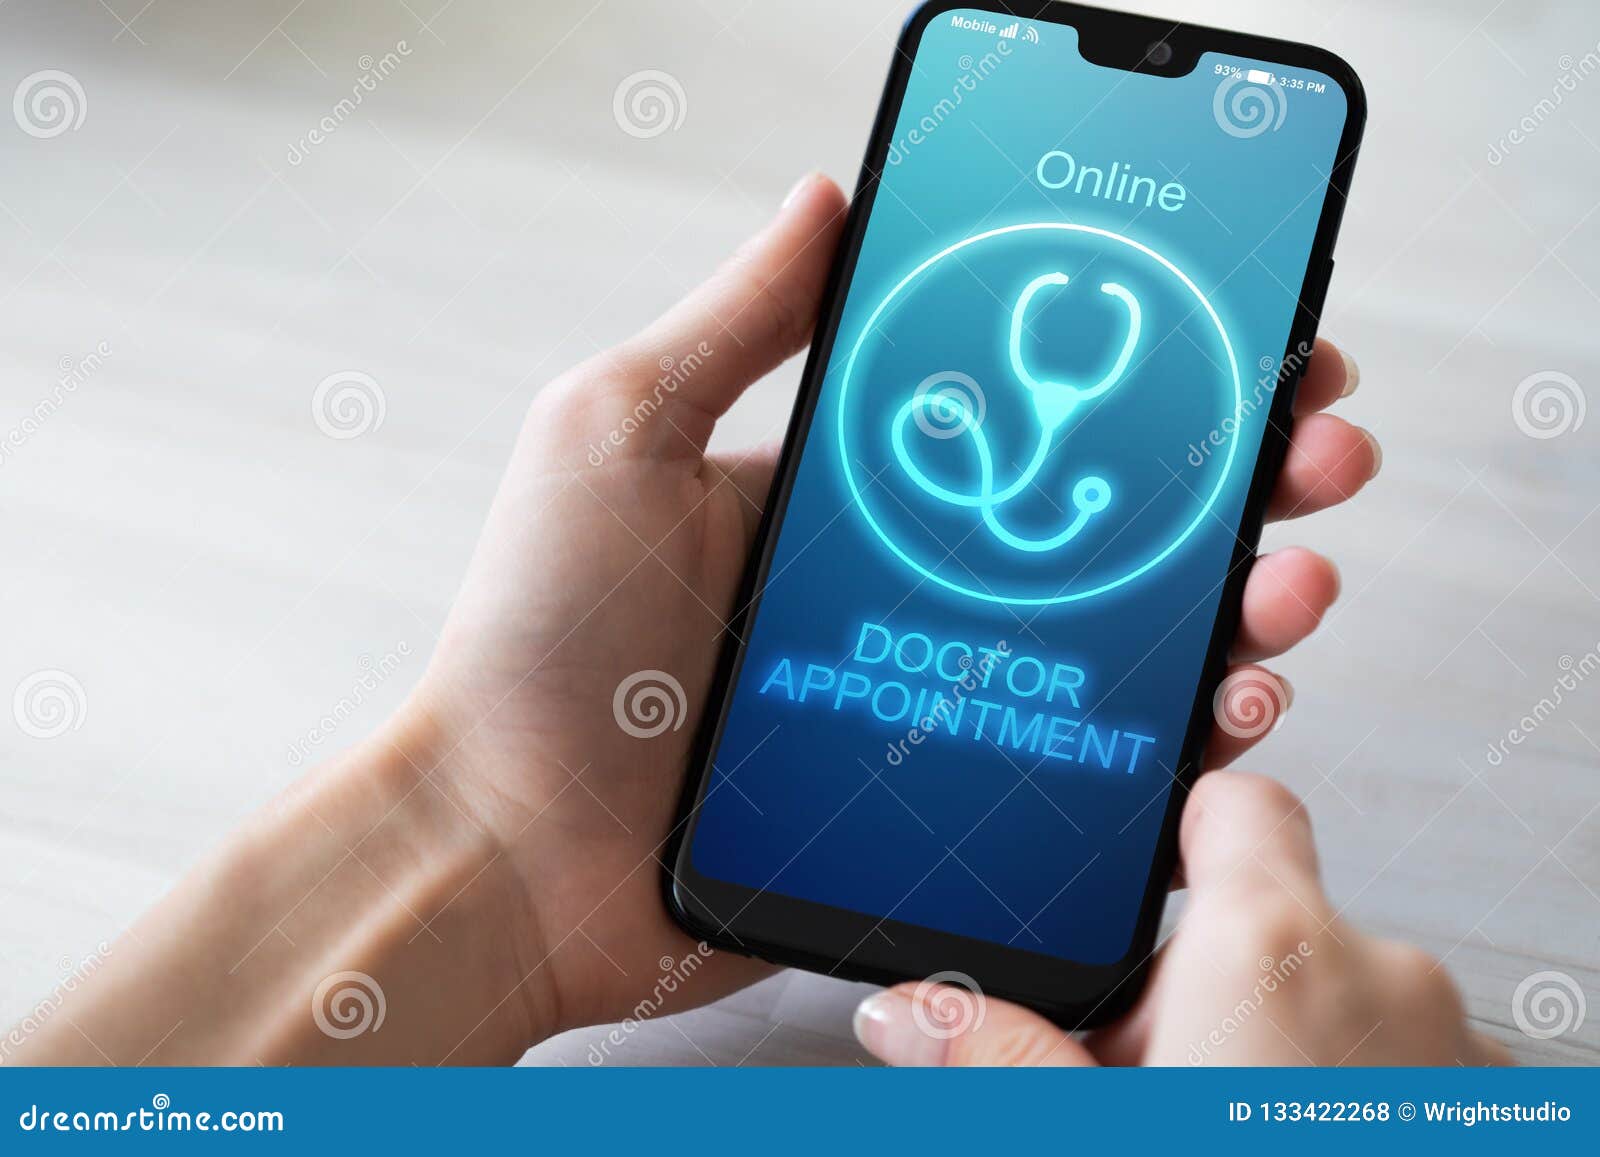 online doctor appointment on mobile phone screen. medical and health care concept.